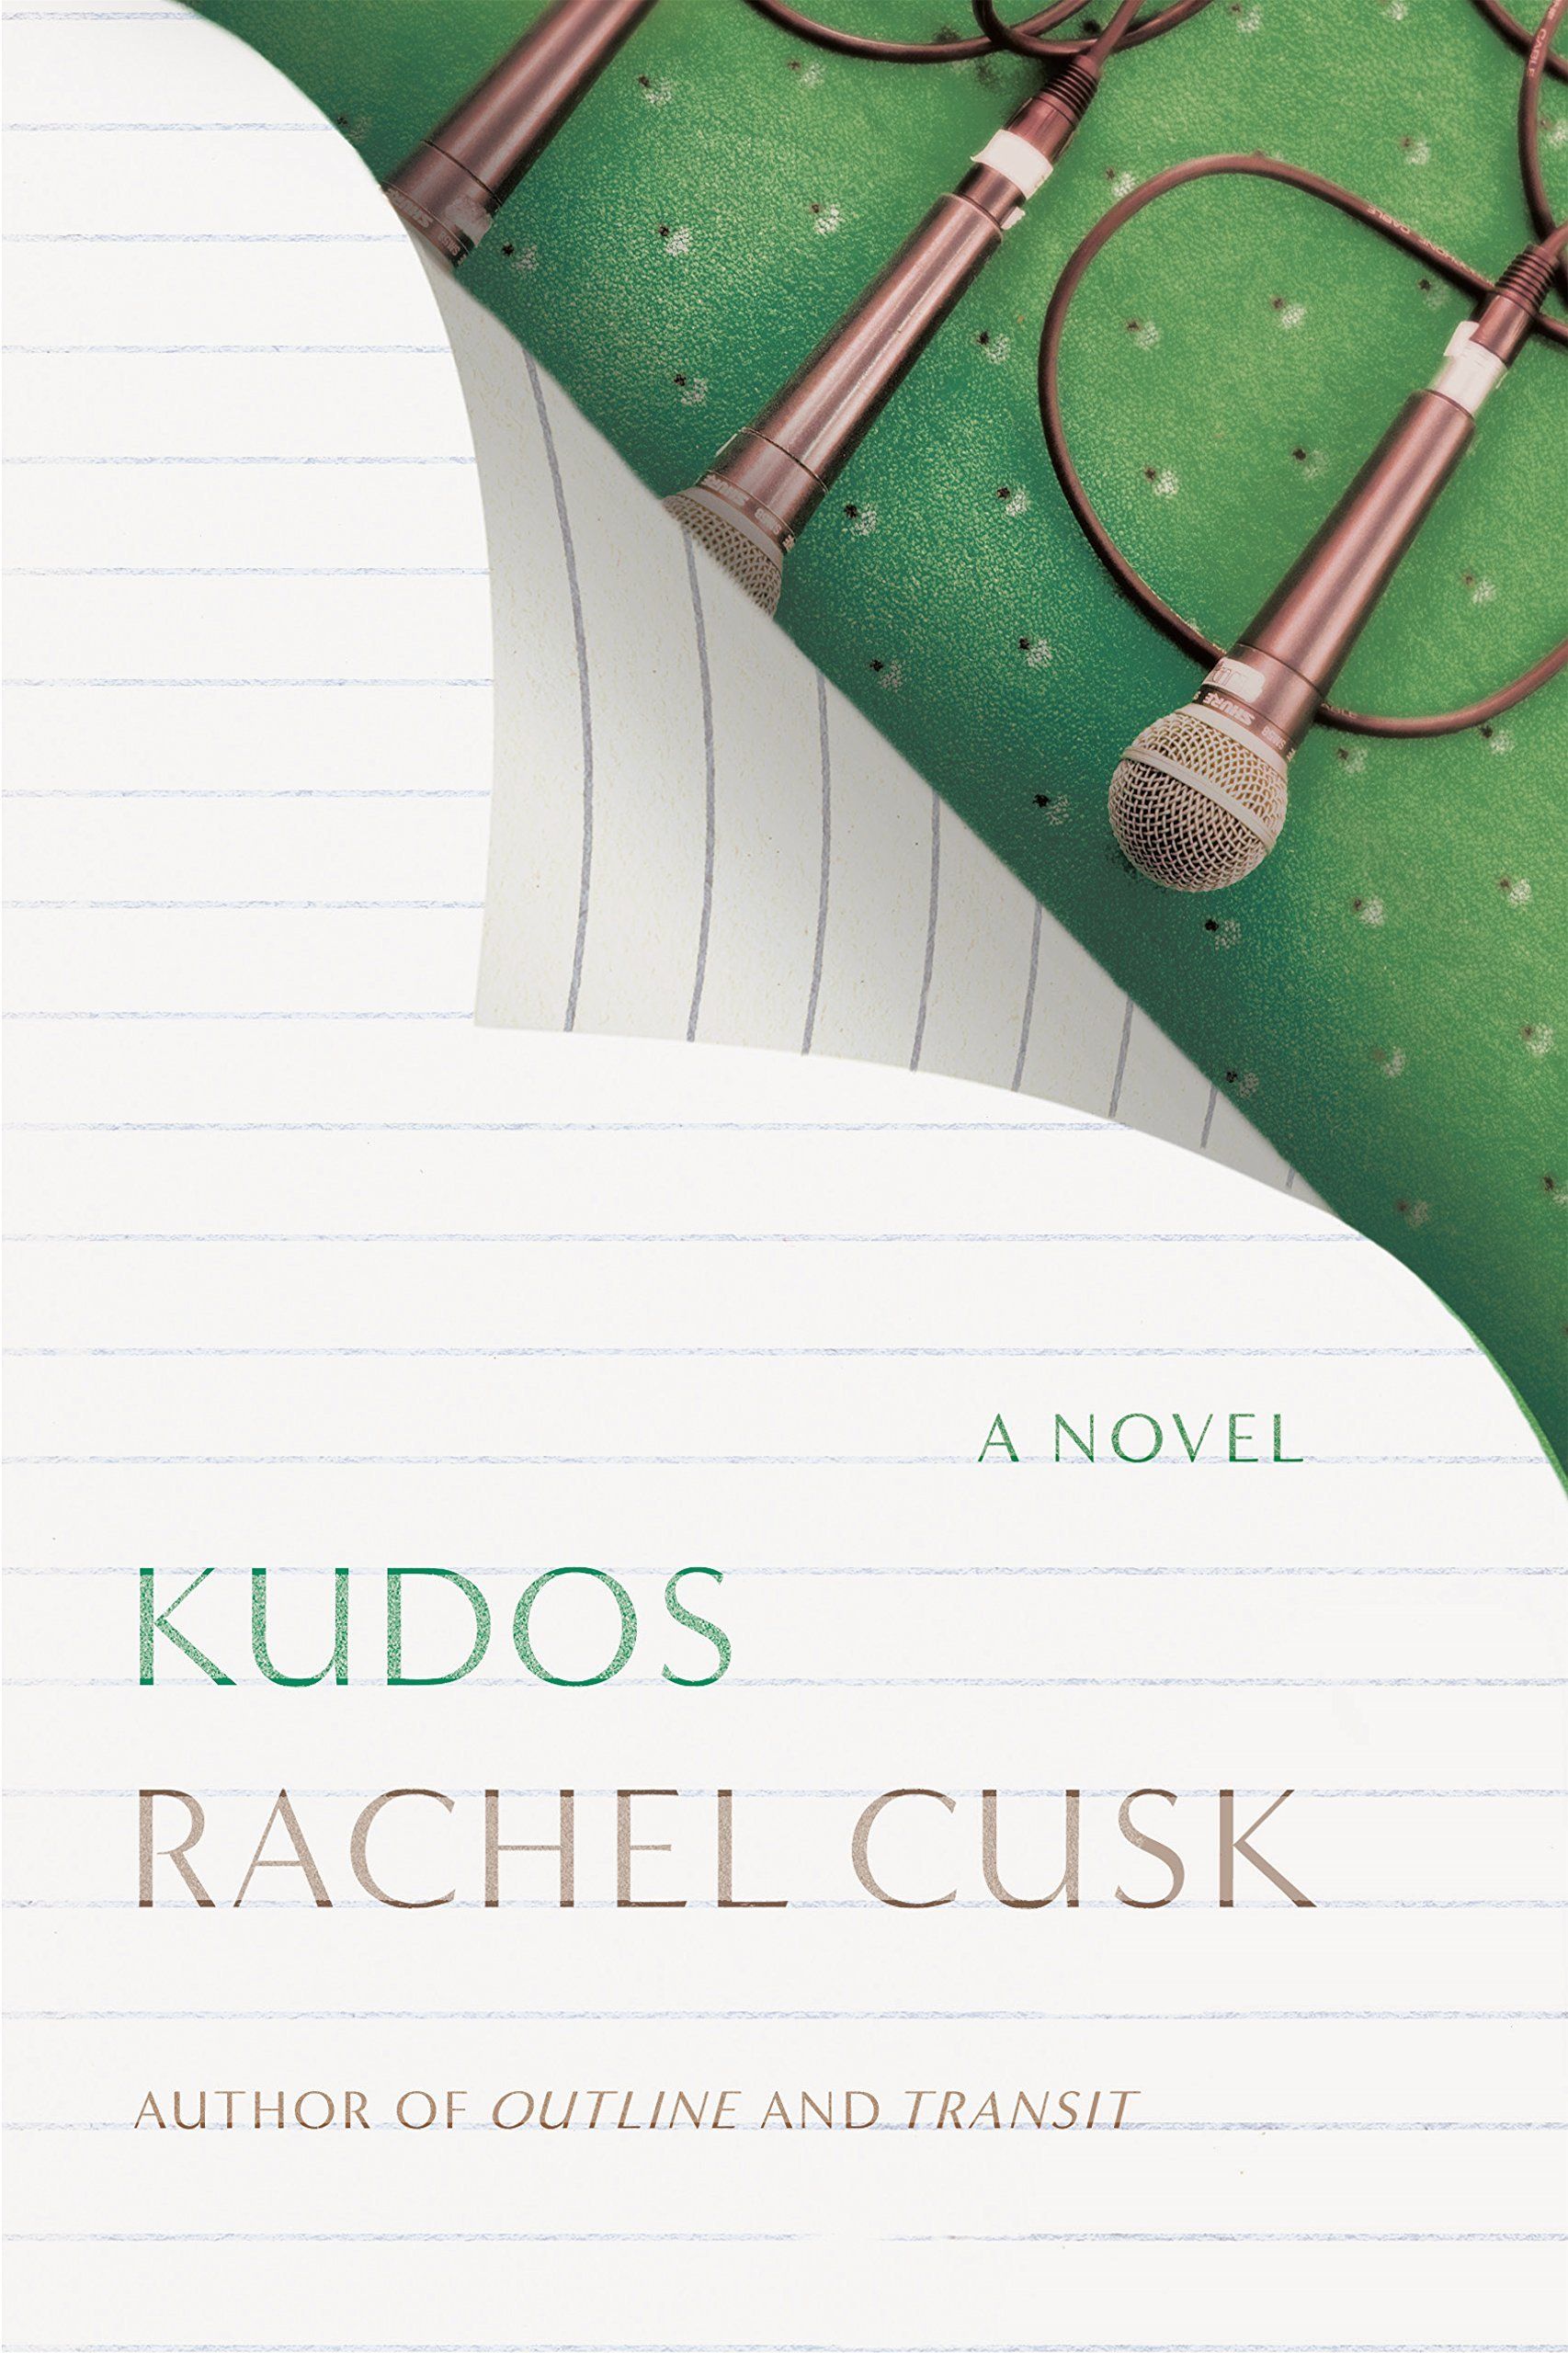 Cover of the Kudos english version